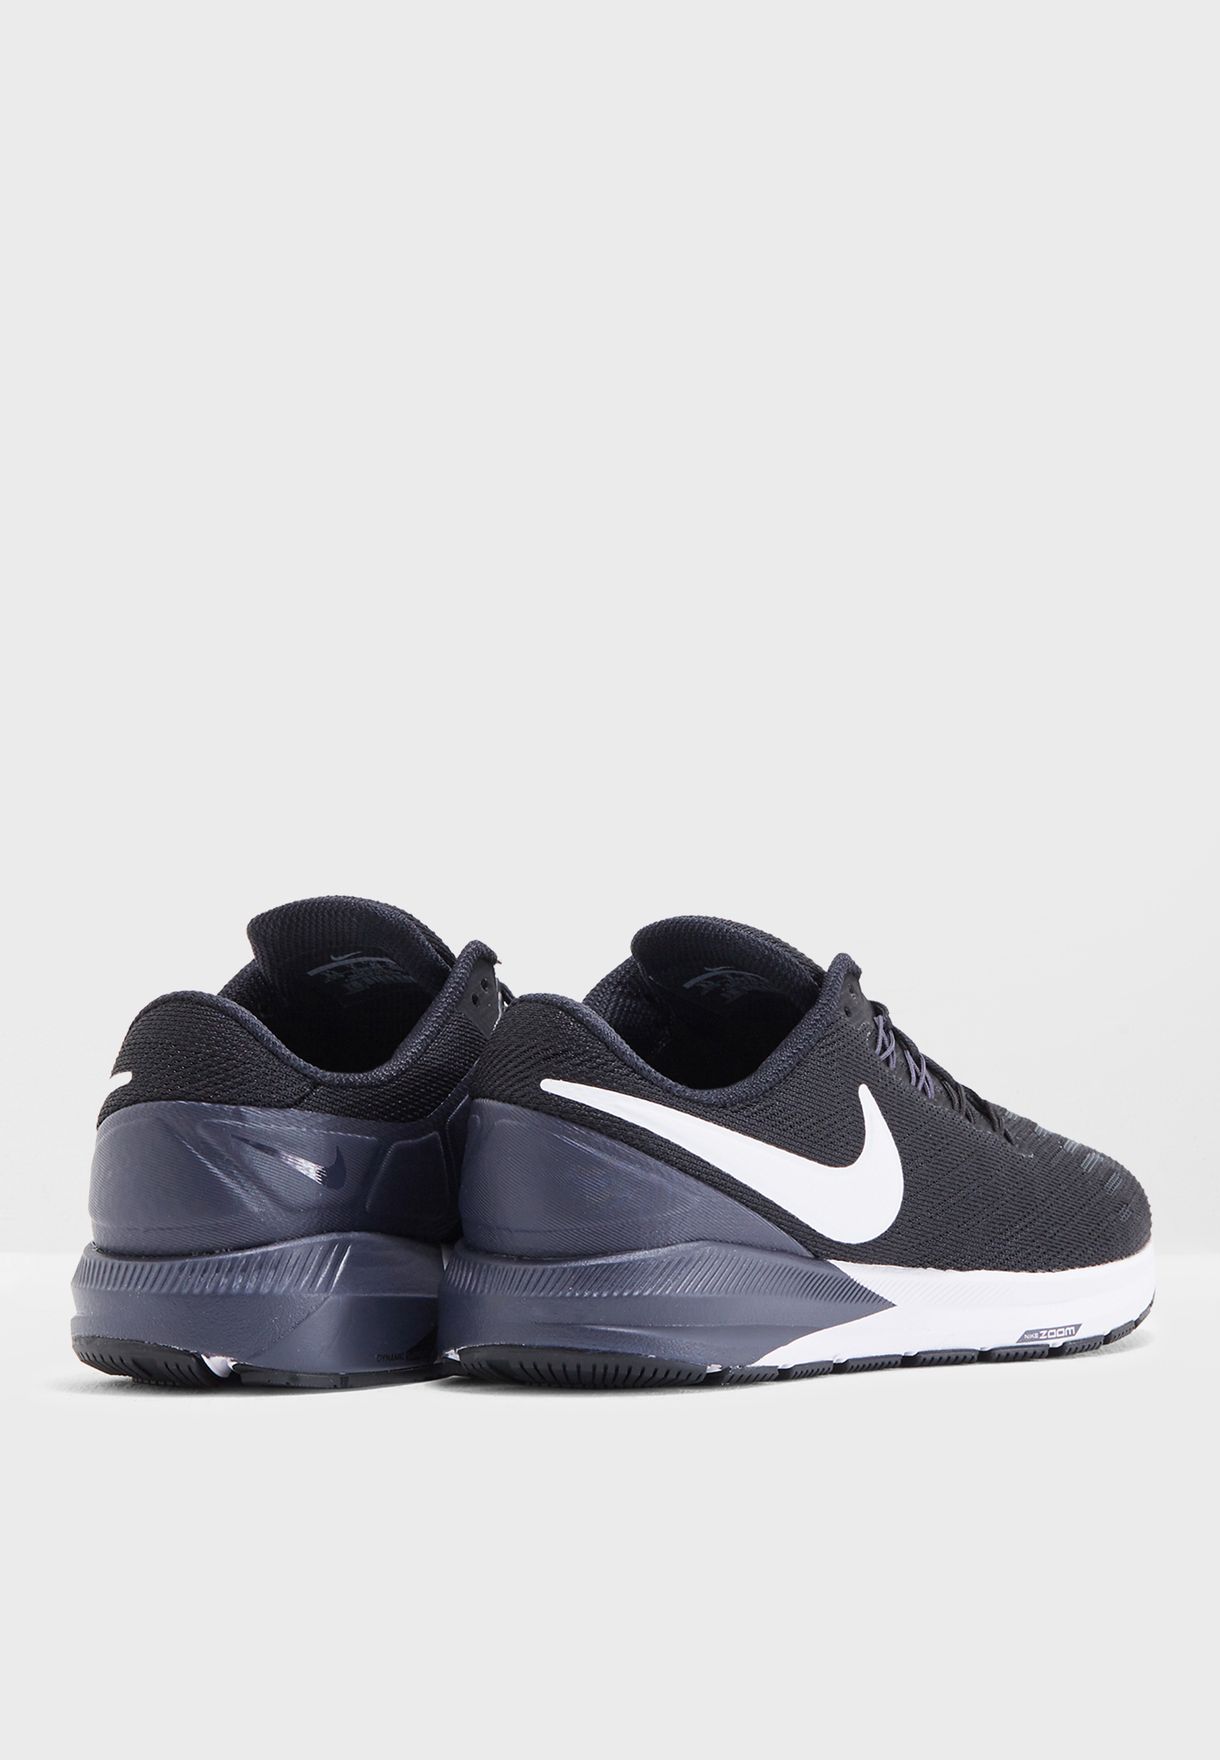 nike women's air zoom structure 22 running shoes - black/vast grey